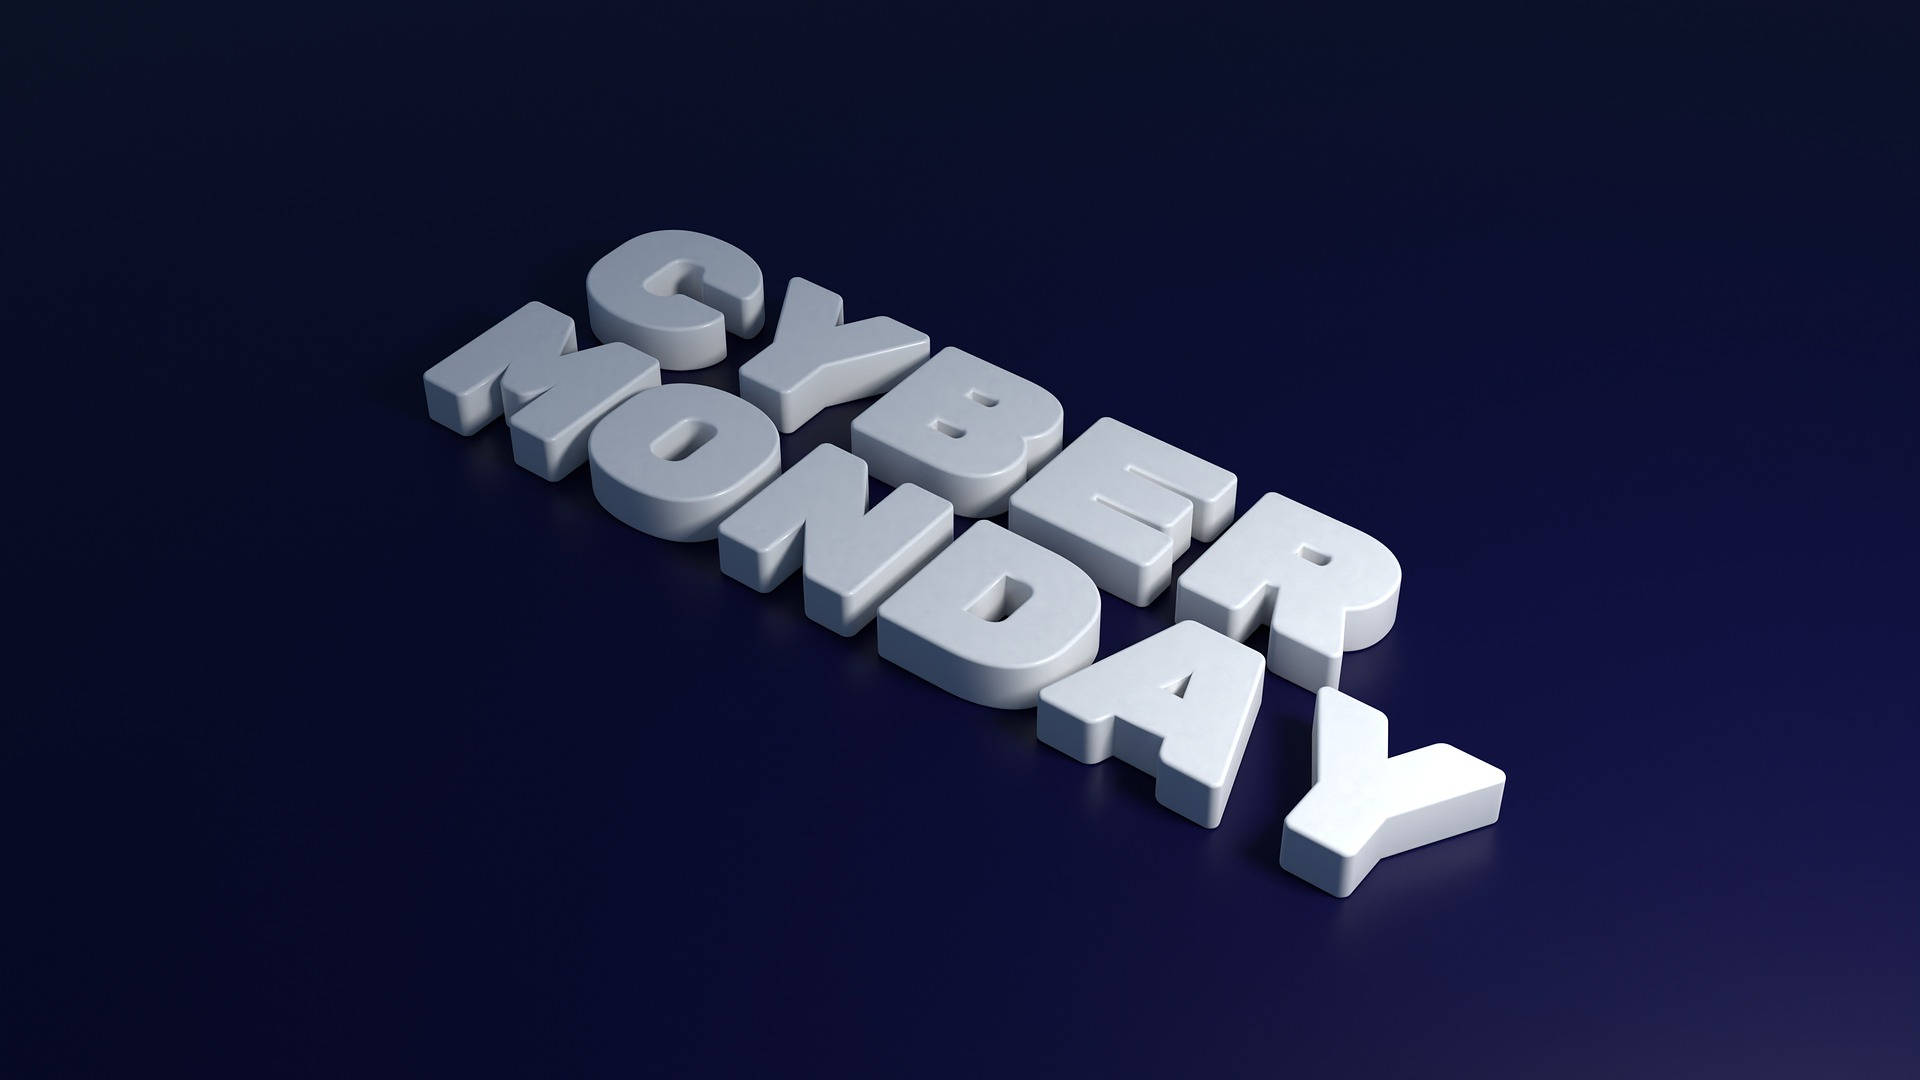 Cyber Monday Business Concept